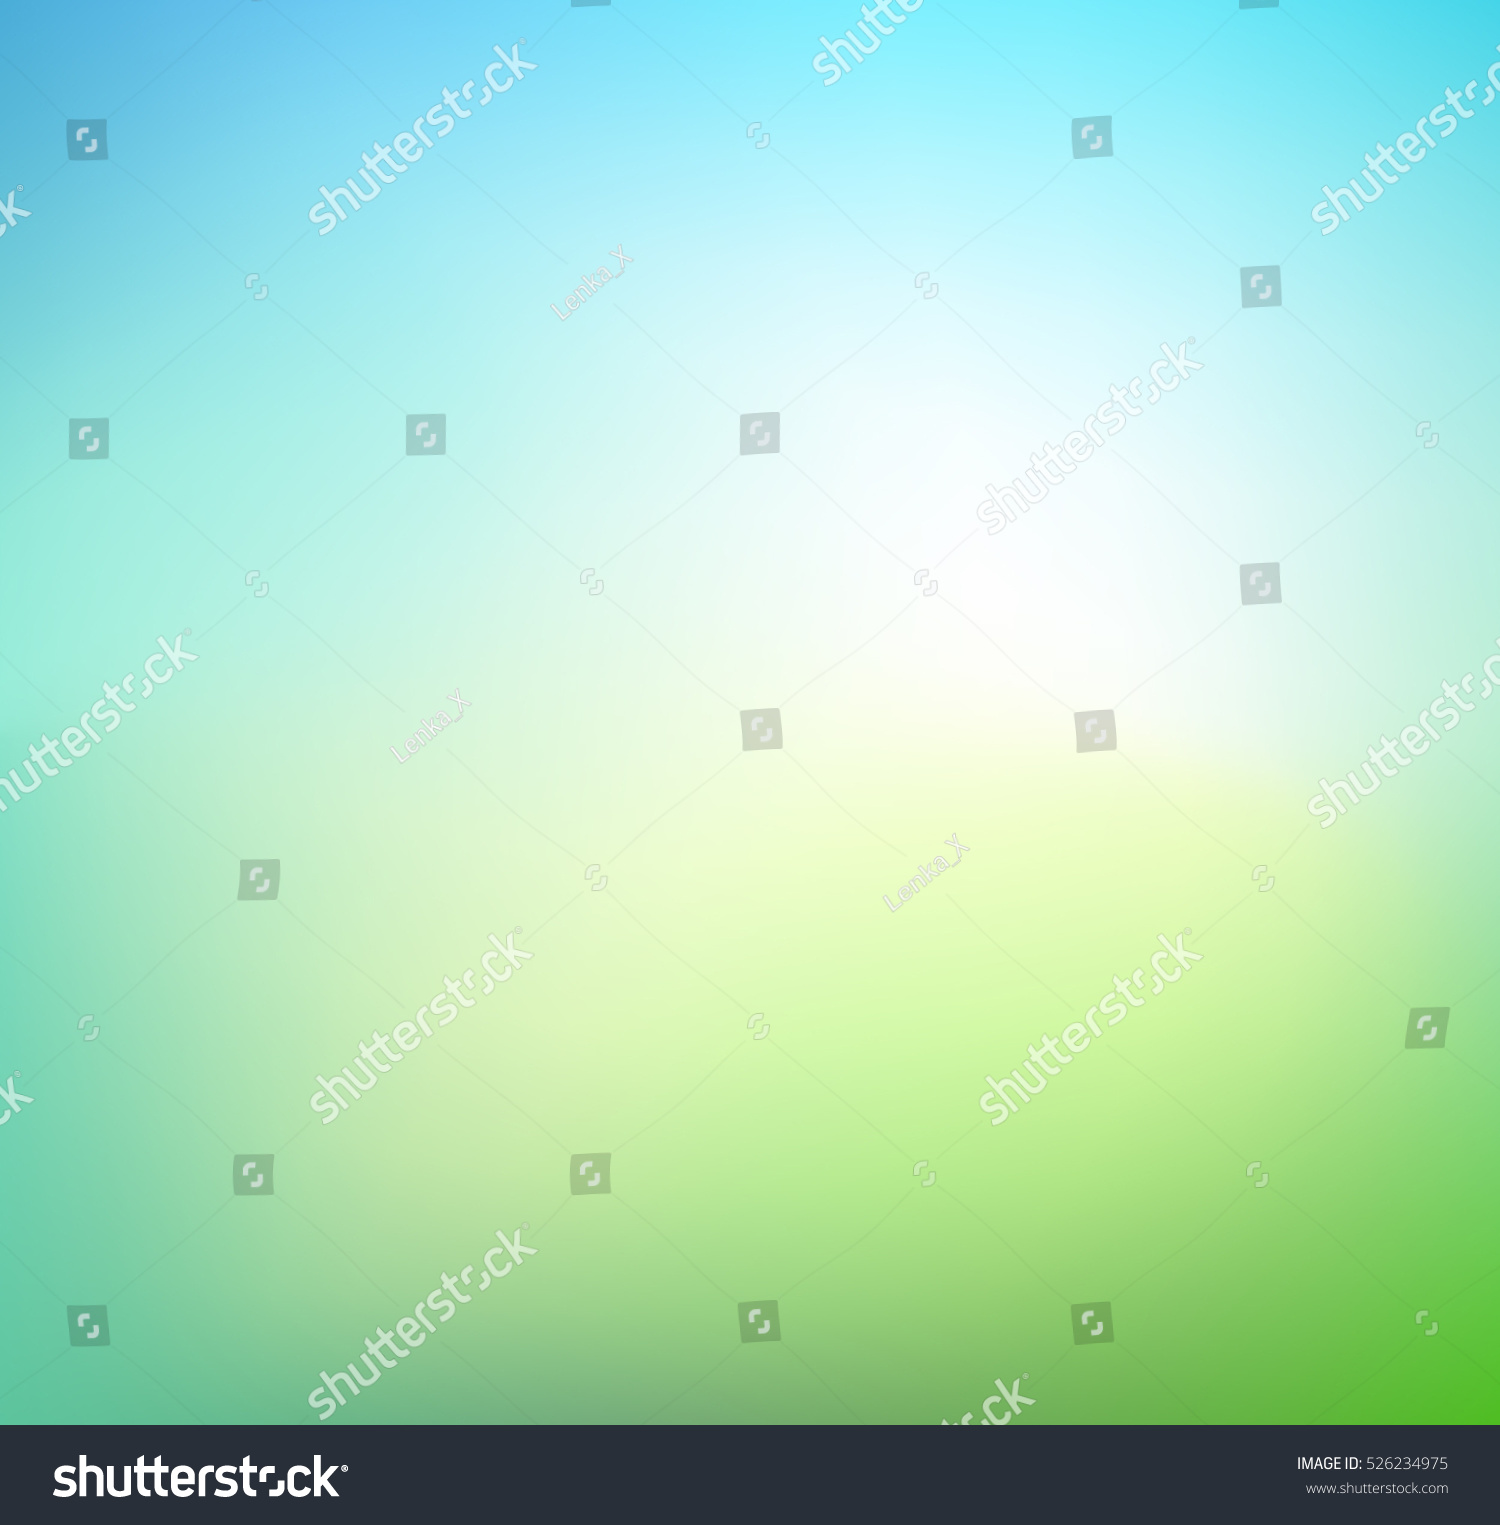 Abstract green blurred gradient background. Nature backdrop. Vector illustration. Ecology concept for your graphic design, banner or poster. #526234975